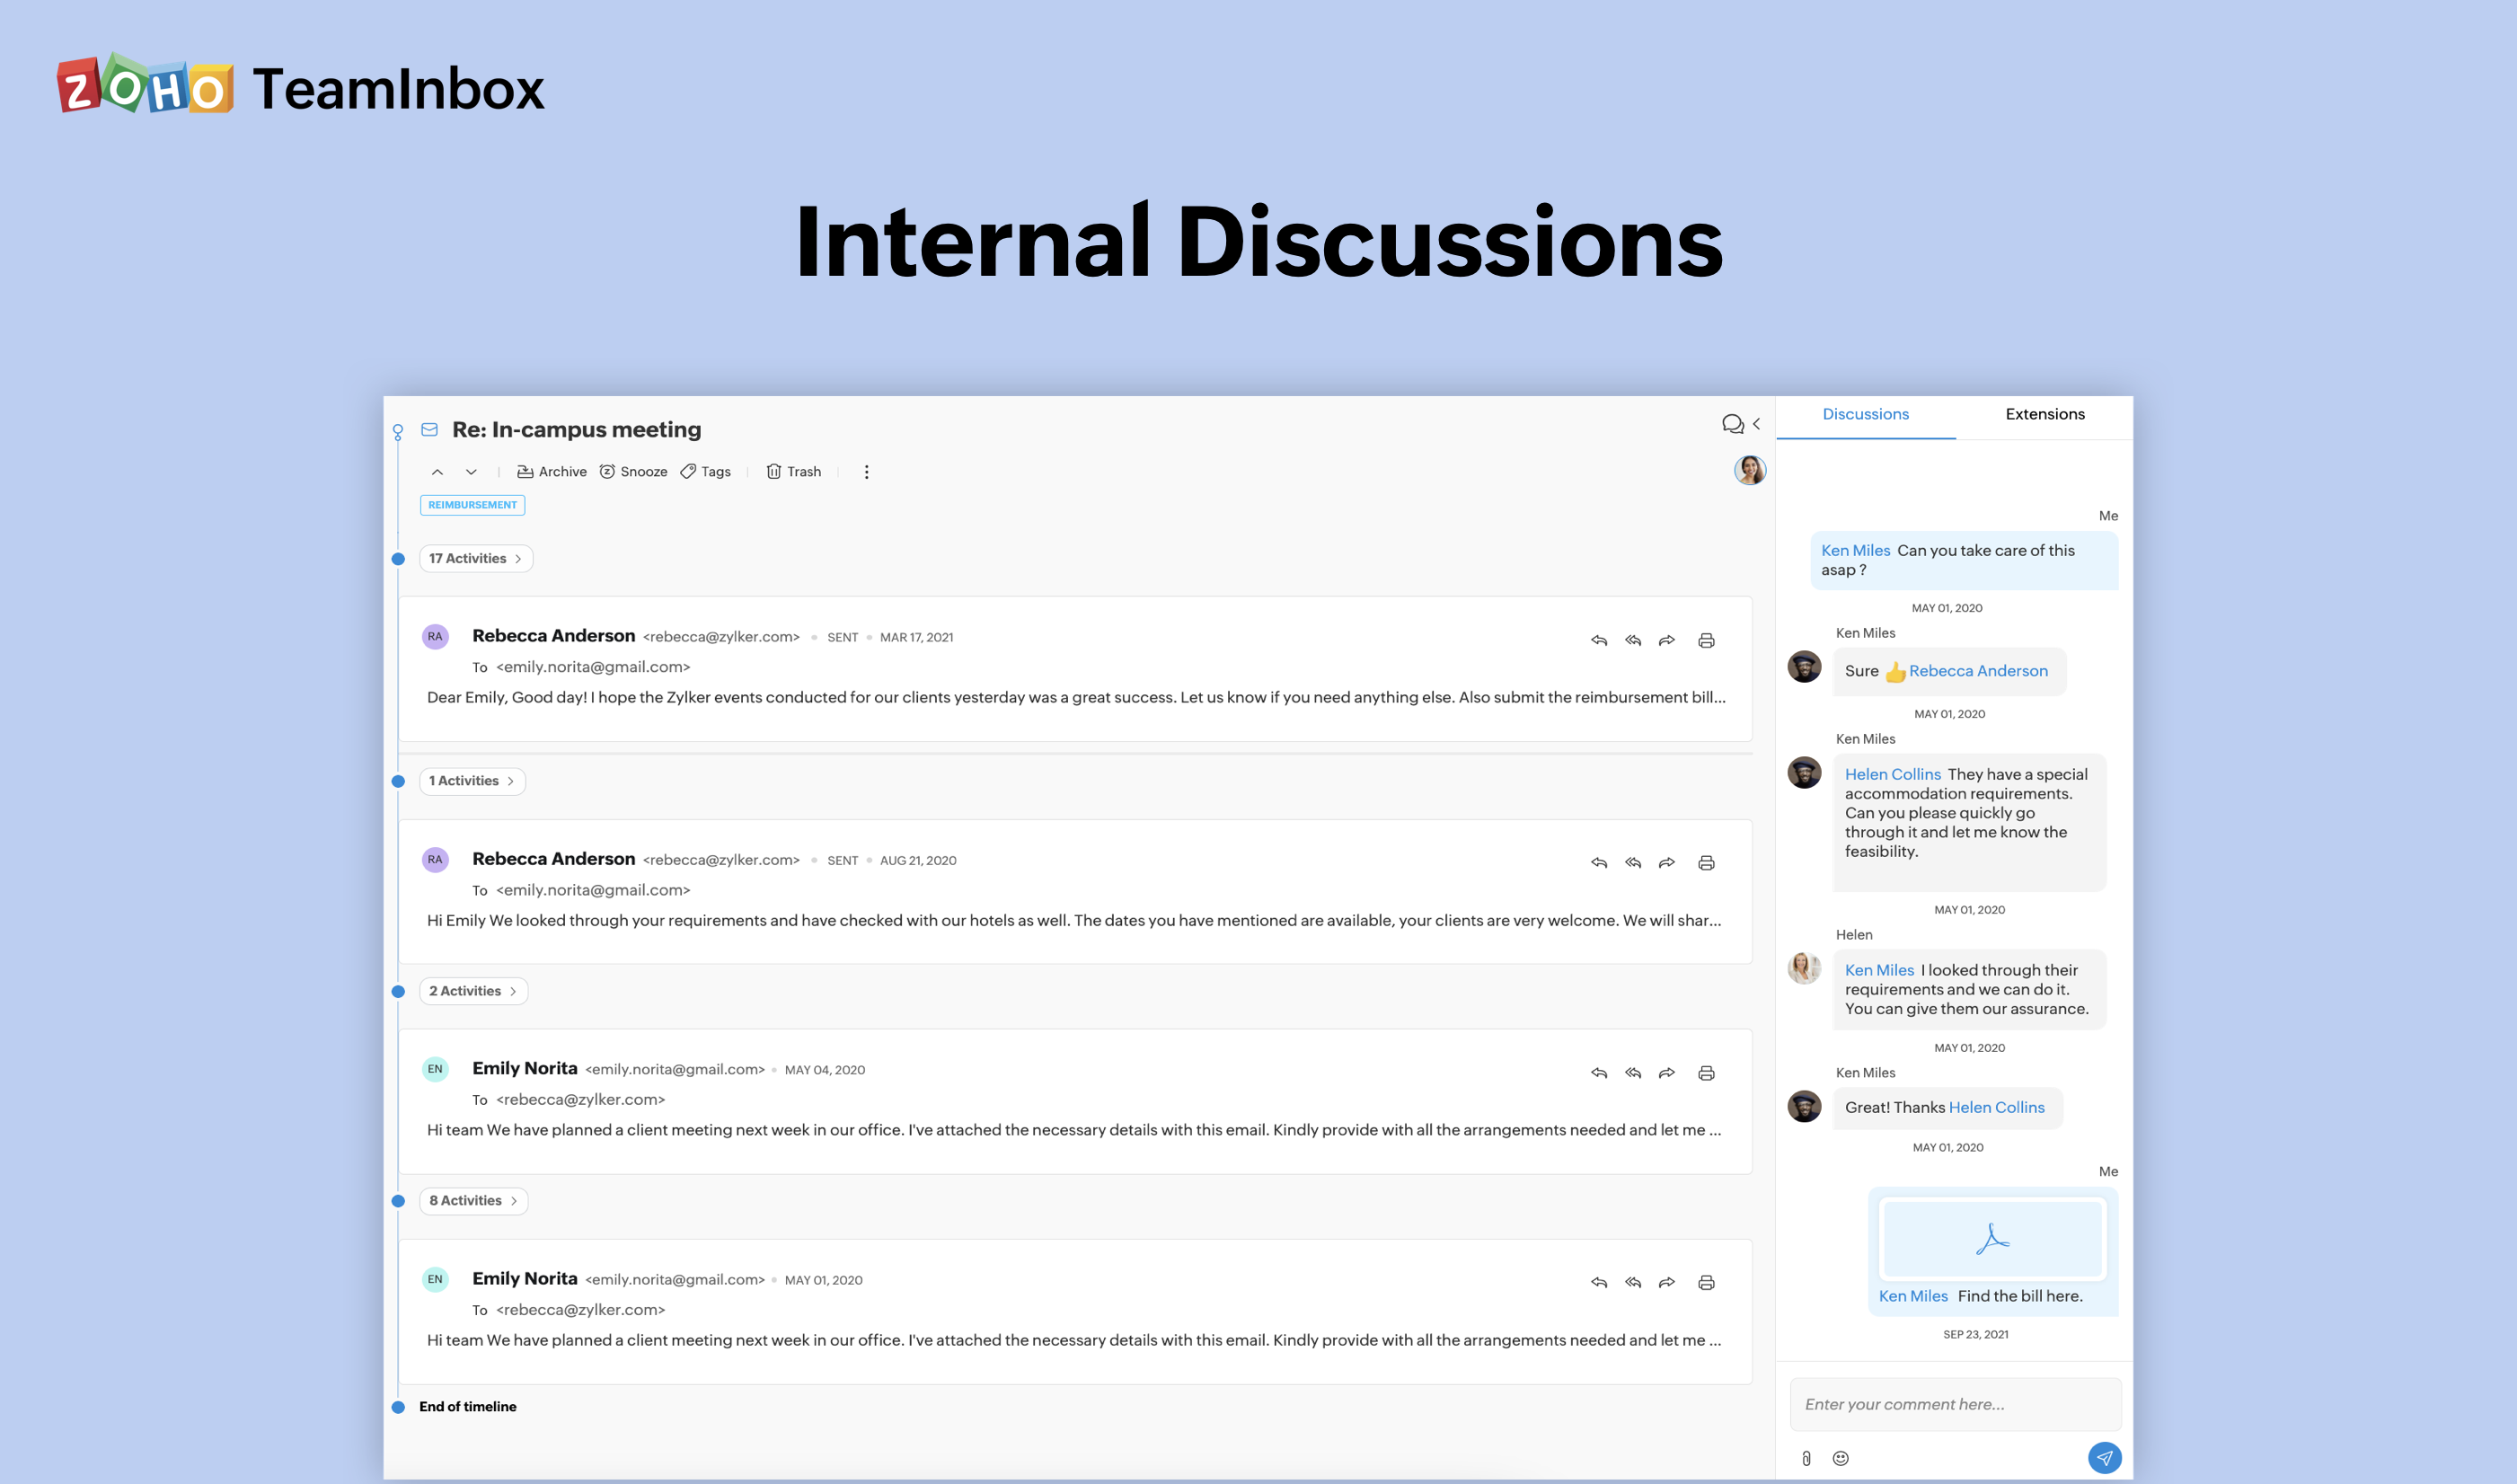 Zoho TeamInbox internal discussions